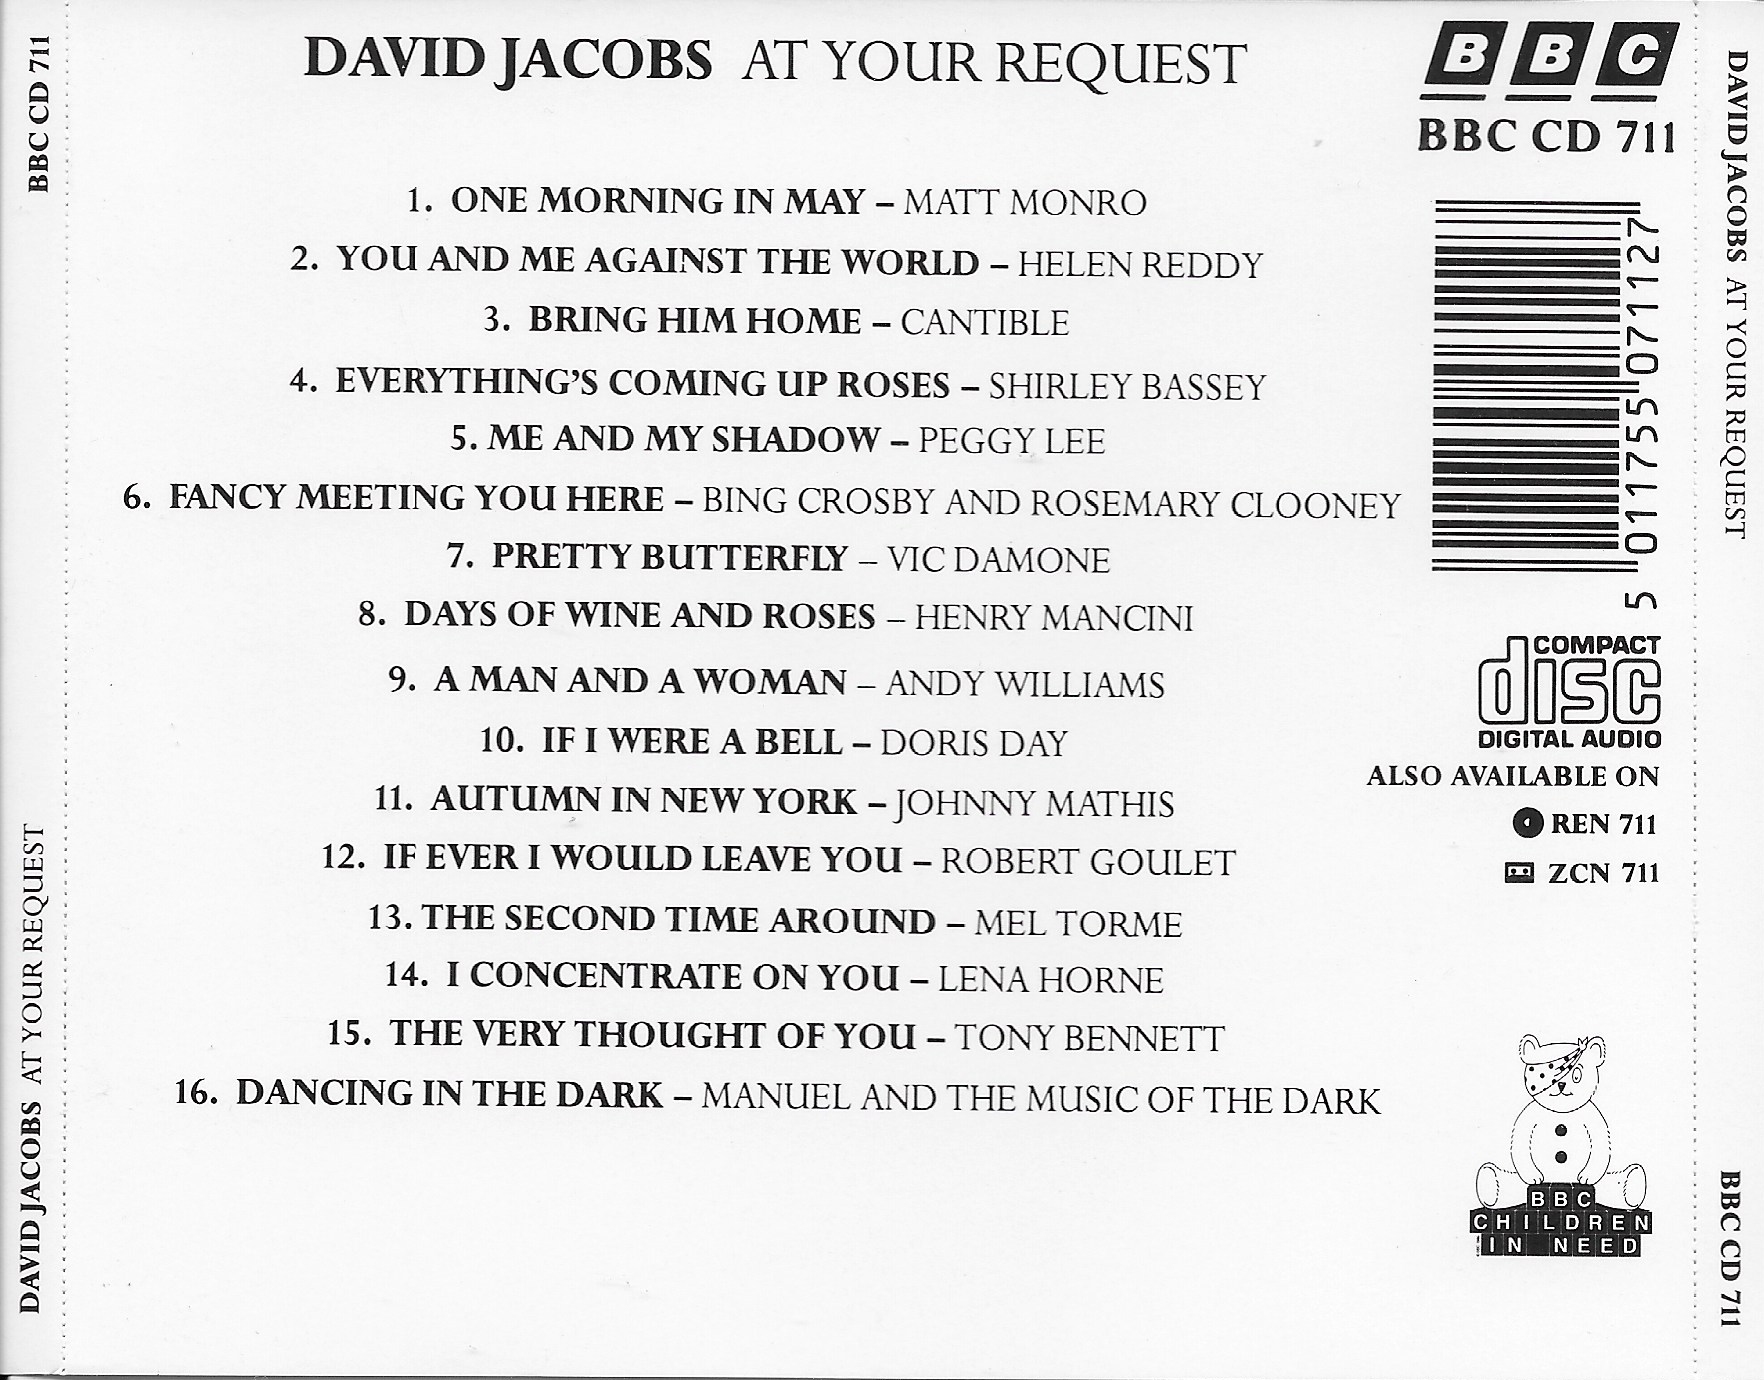 Picture of BBCCD711 At your request - David Jacobs by artist David Jacobs from the BBC records and Tapes library